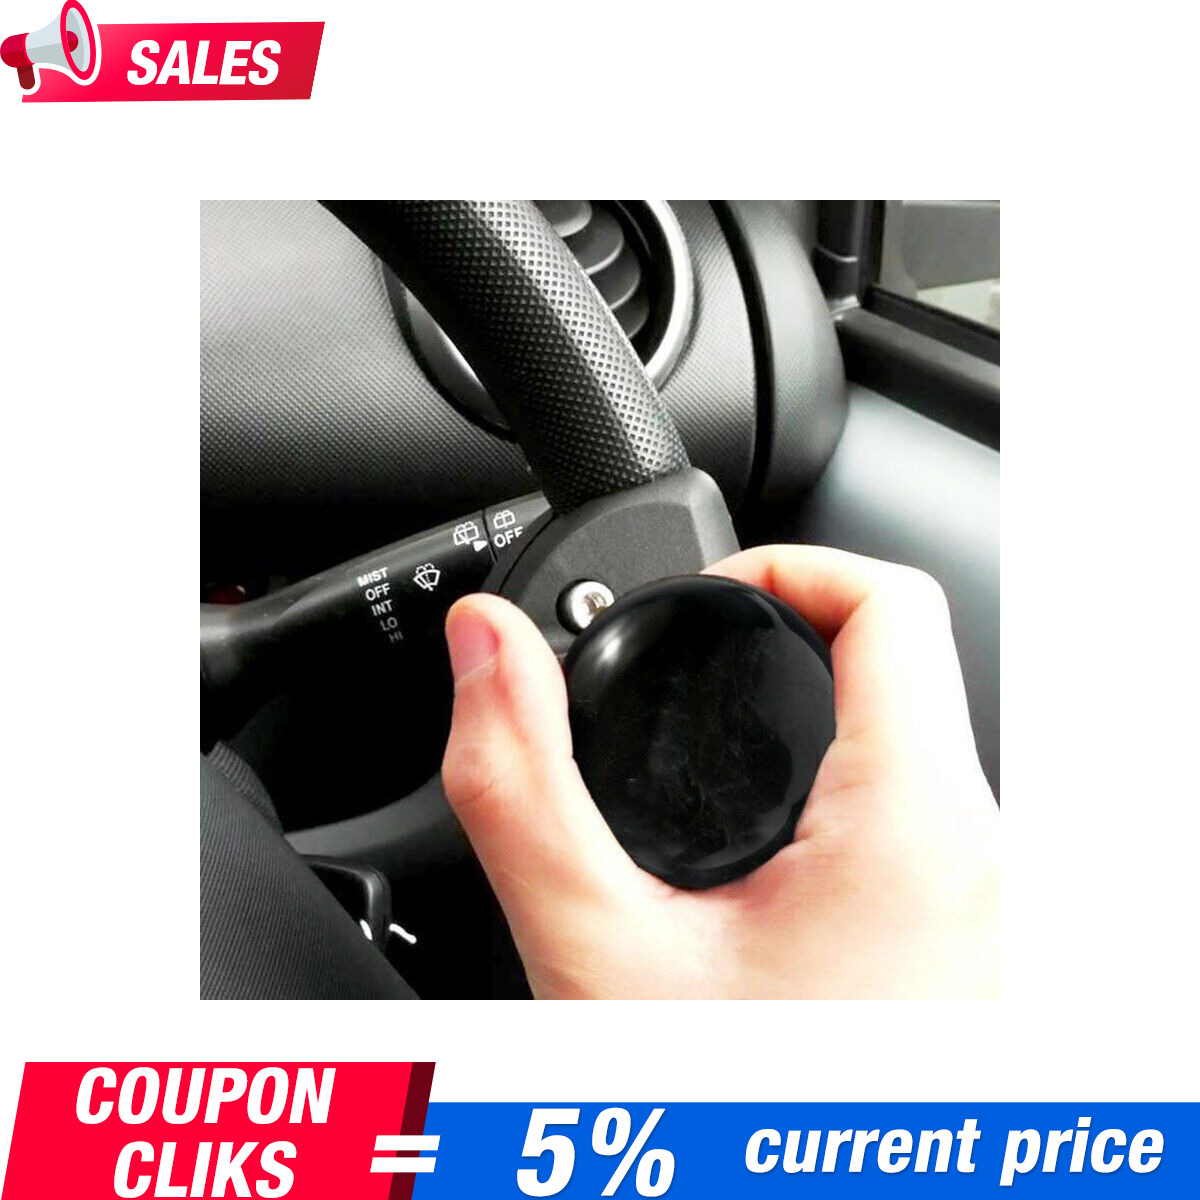 Auto Heavy Duty Suicide Steering Knob Car Wheel Spinner Booster Handle Knob PW